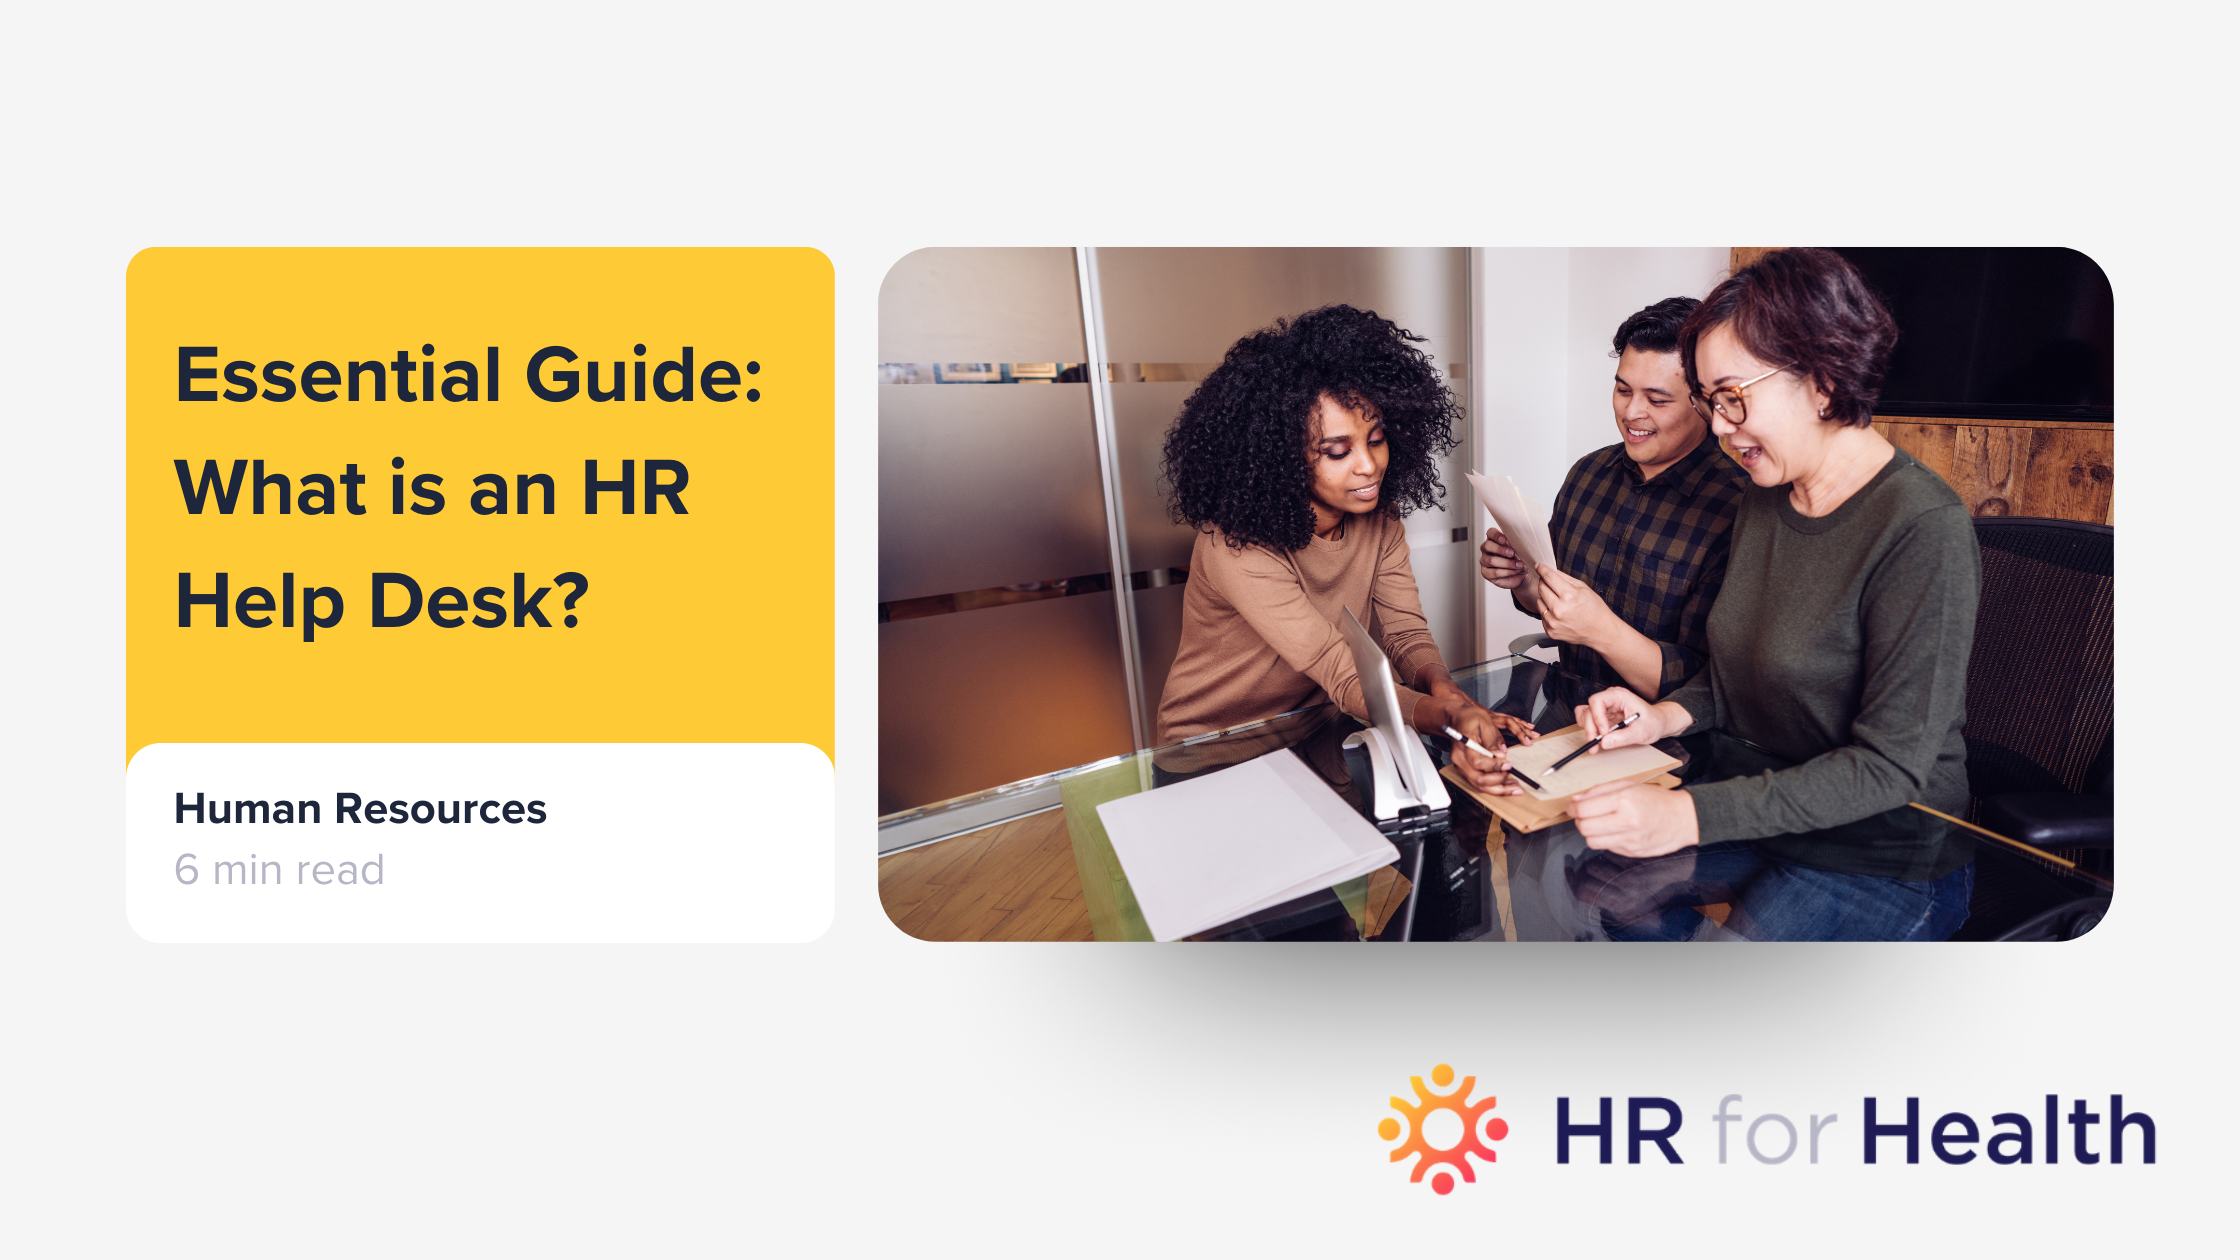 Essential Guide: What is an HR Help Desk?